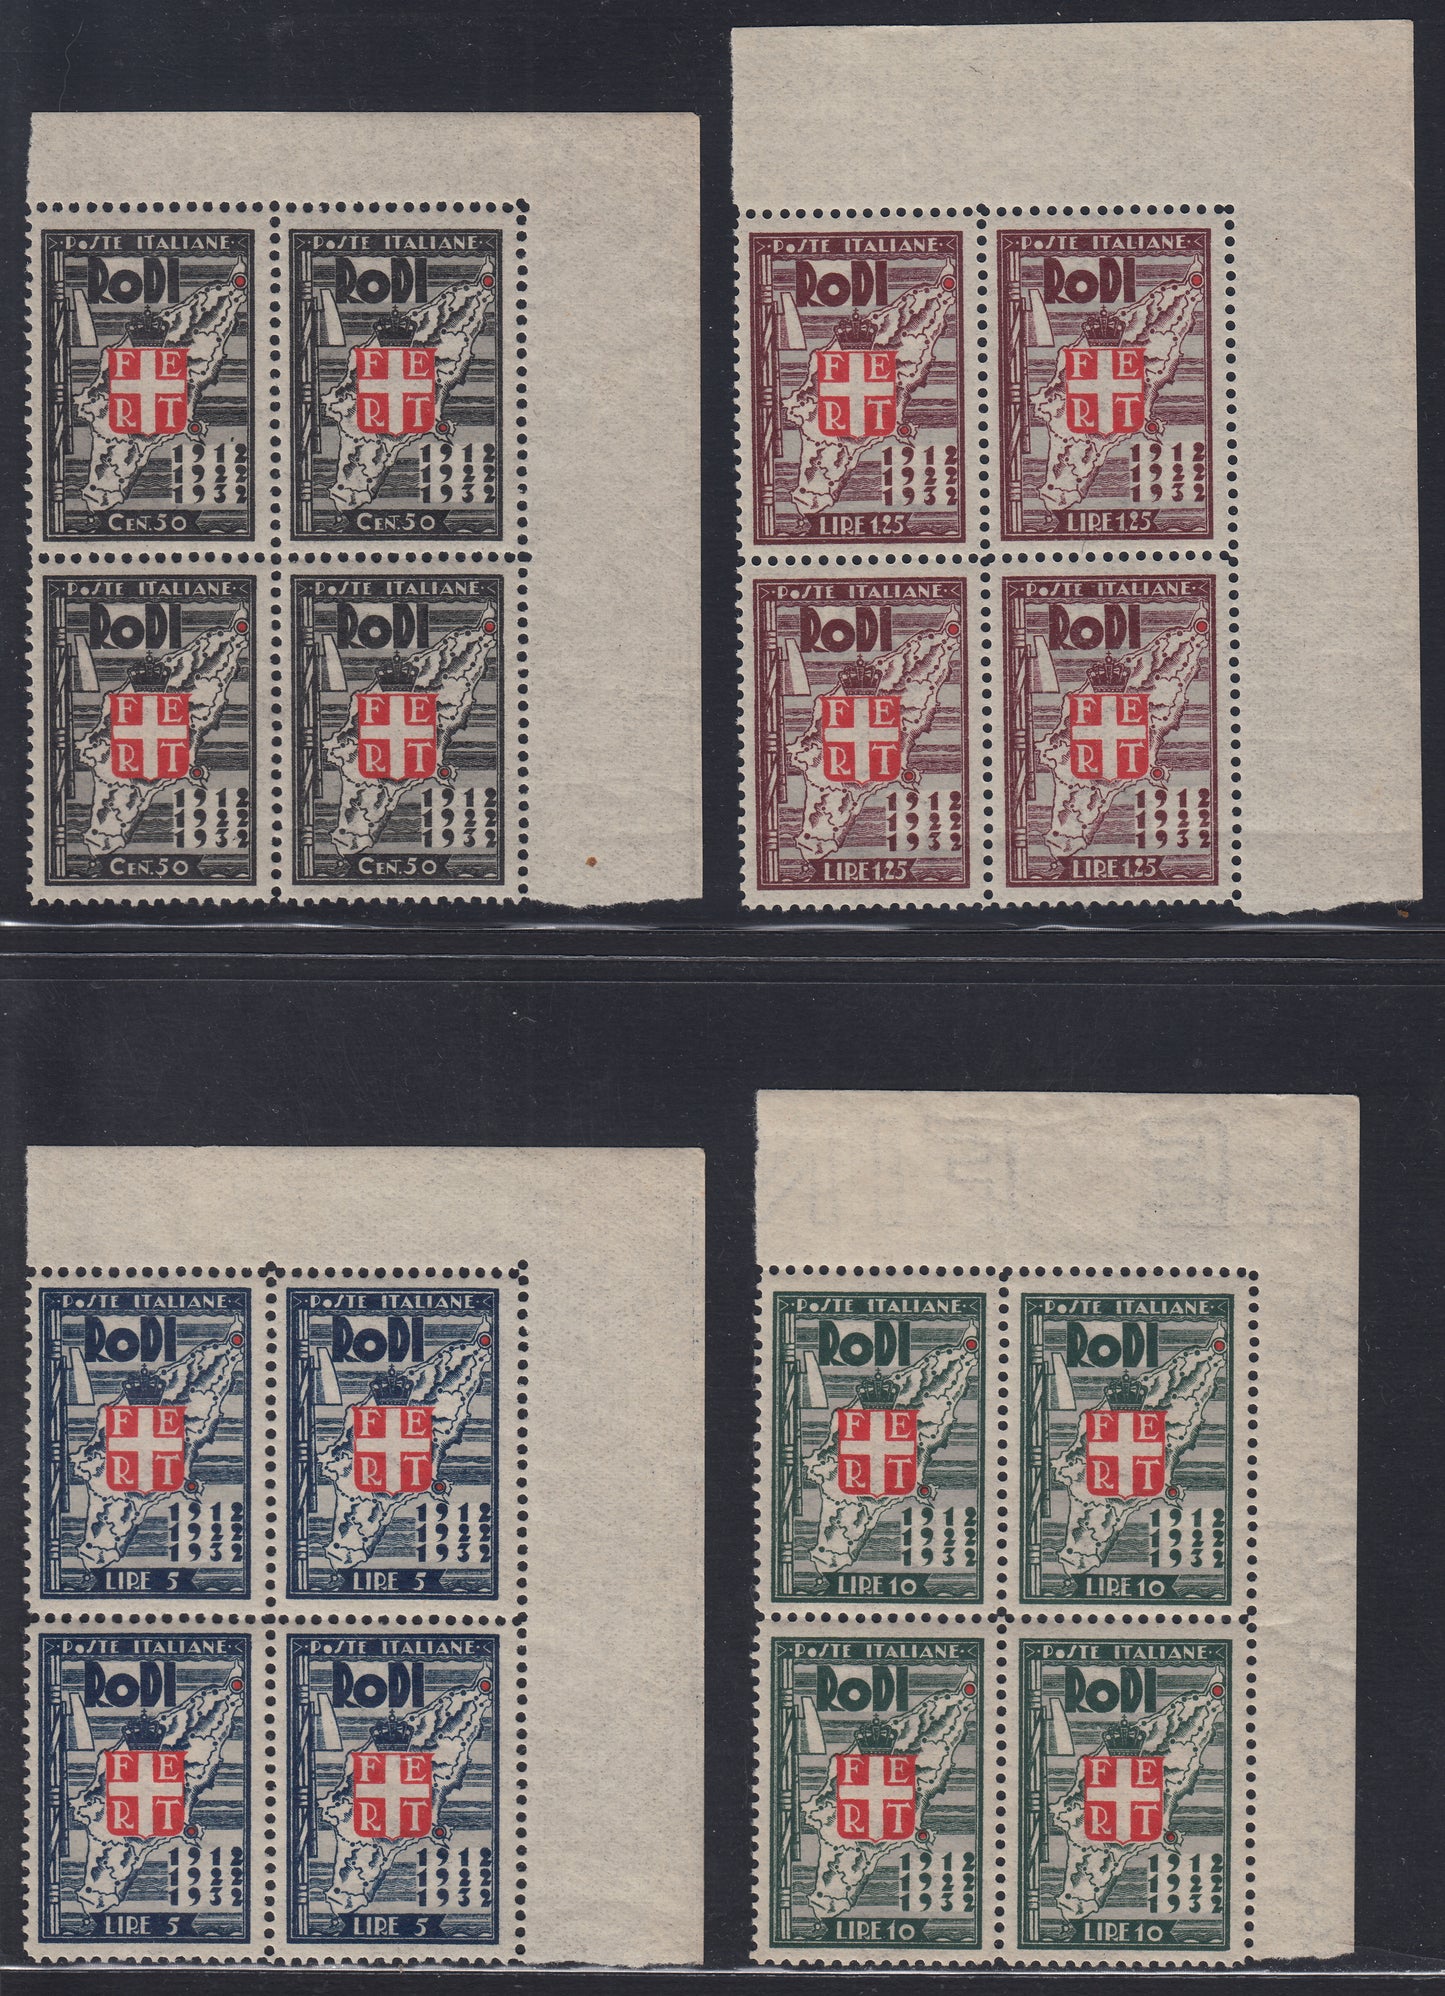 Egeo30 - 1932 - Egeo, twentieth anniversary of the occupation and tenth anniversary of the fascist revolution, series of 9 values ​​in blocks of 4 new ones with intact rubber, spectacular! (65/63) 